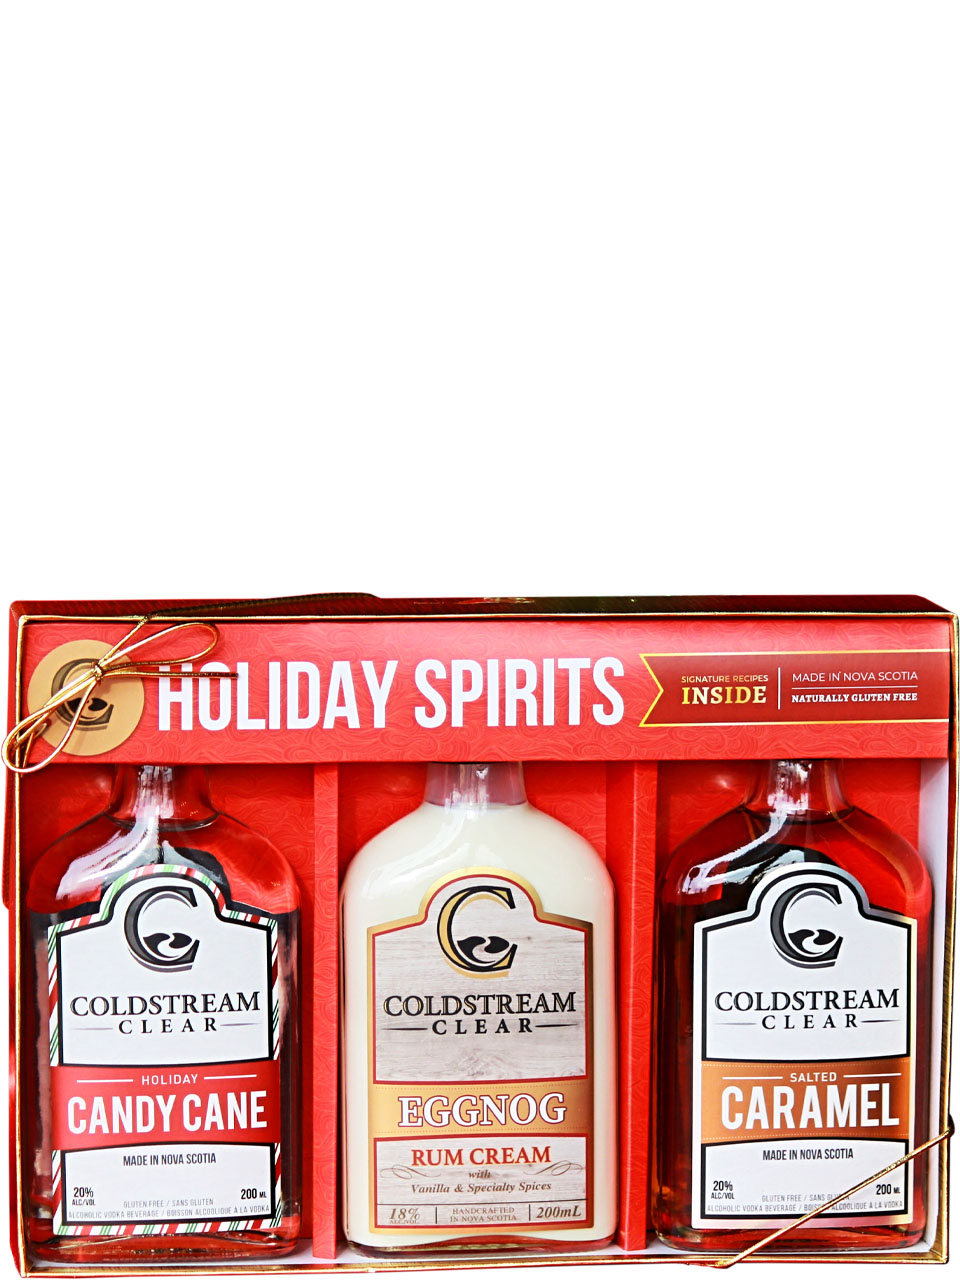 Coldstream Clear Holiday Spirits